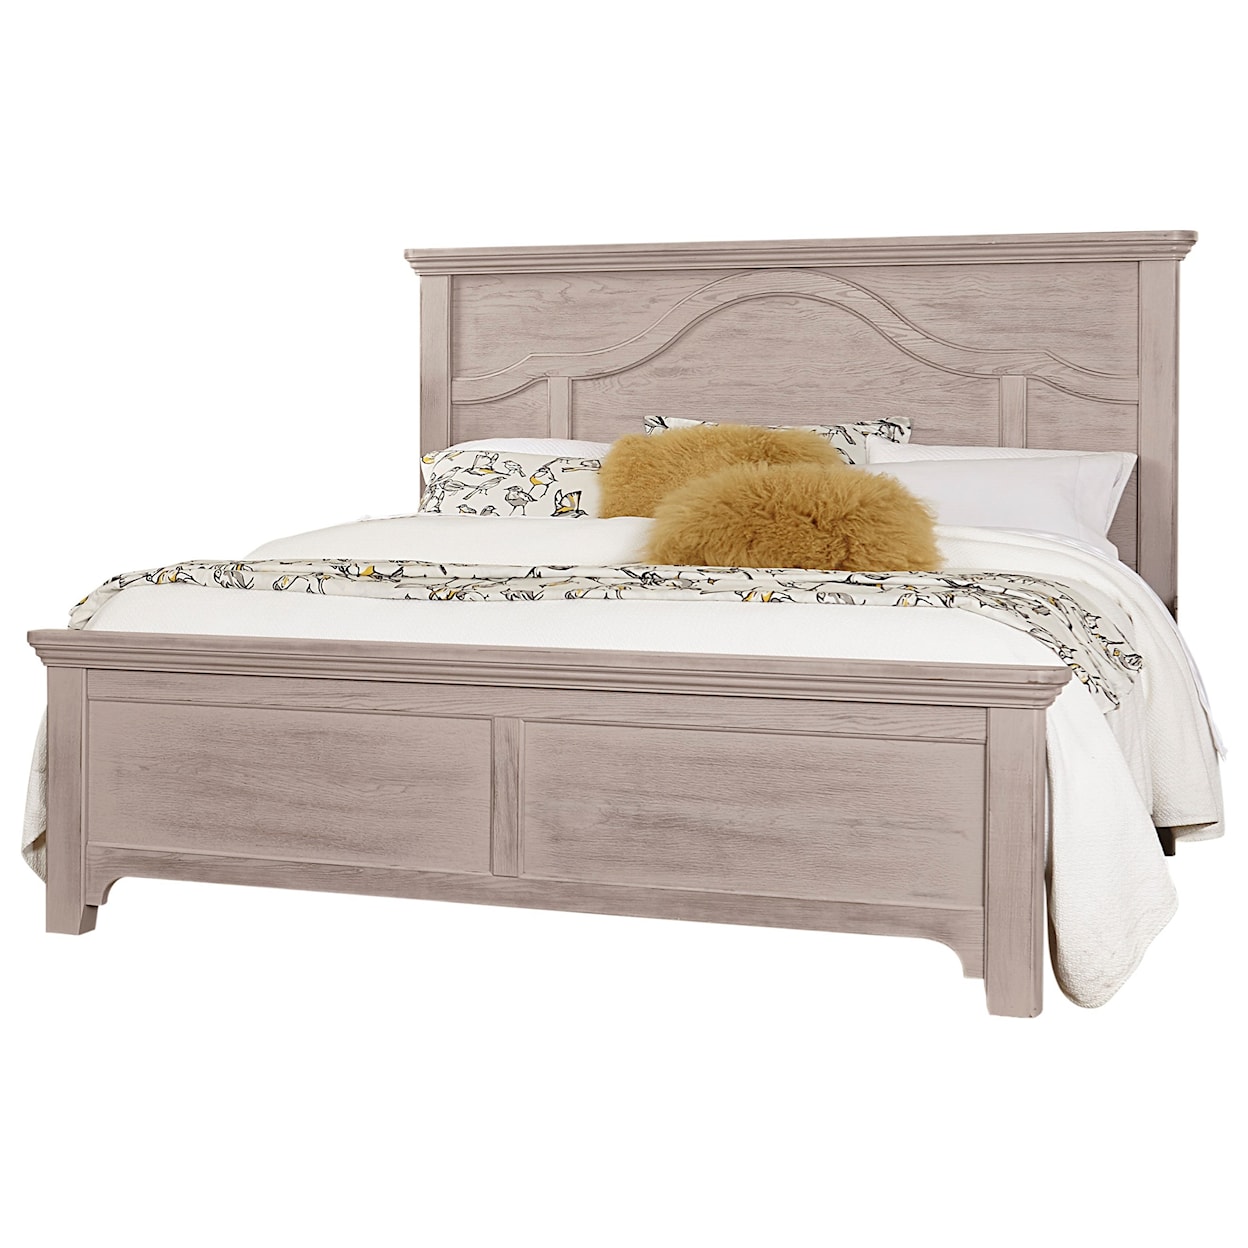 Laurel Mercantile Co Bungalow Vbf741qkit Transitional Queen Bed With Mantel Headboard